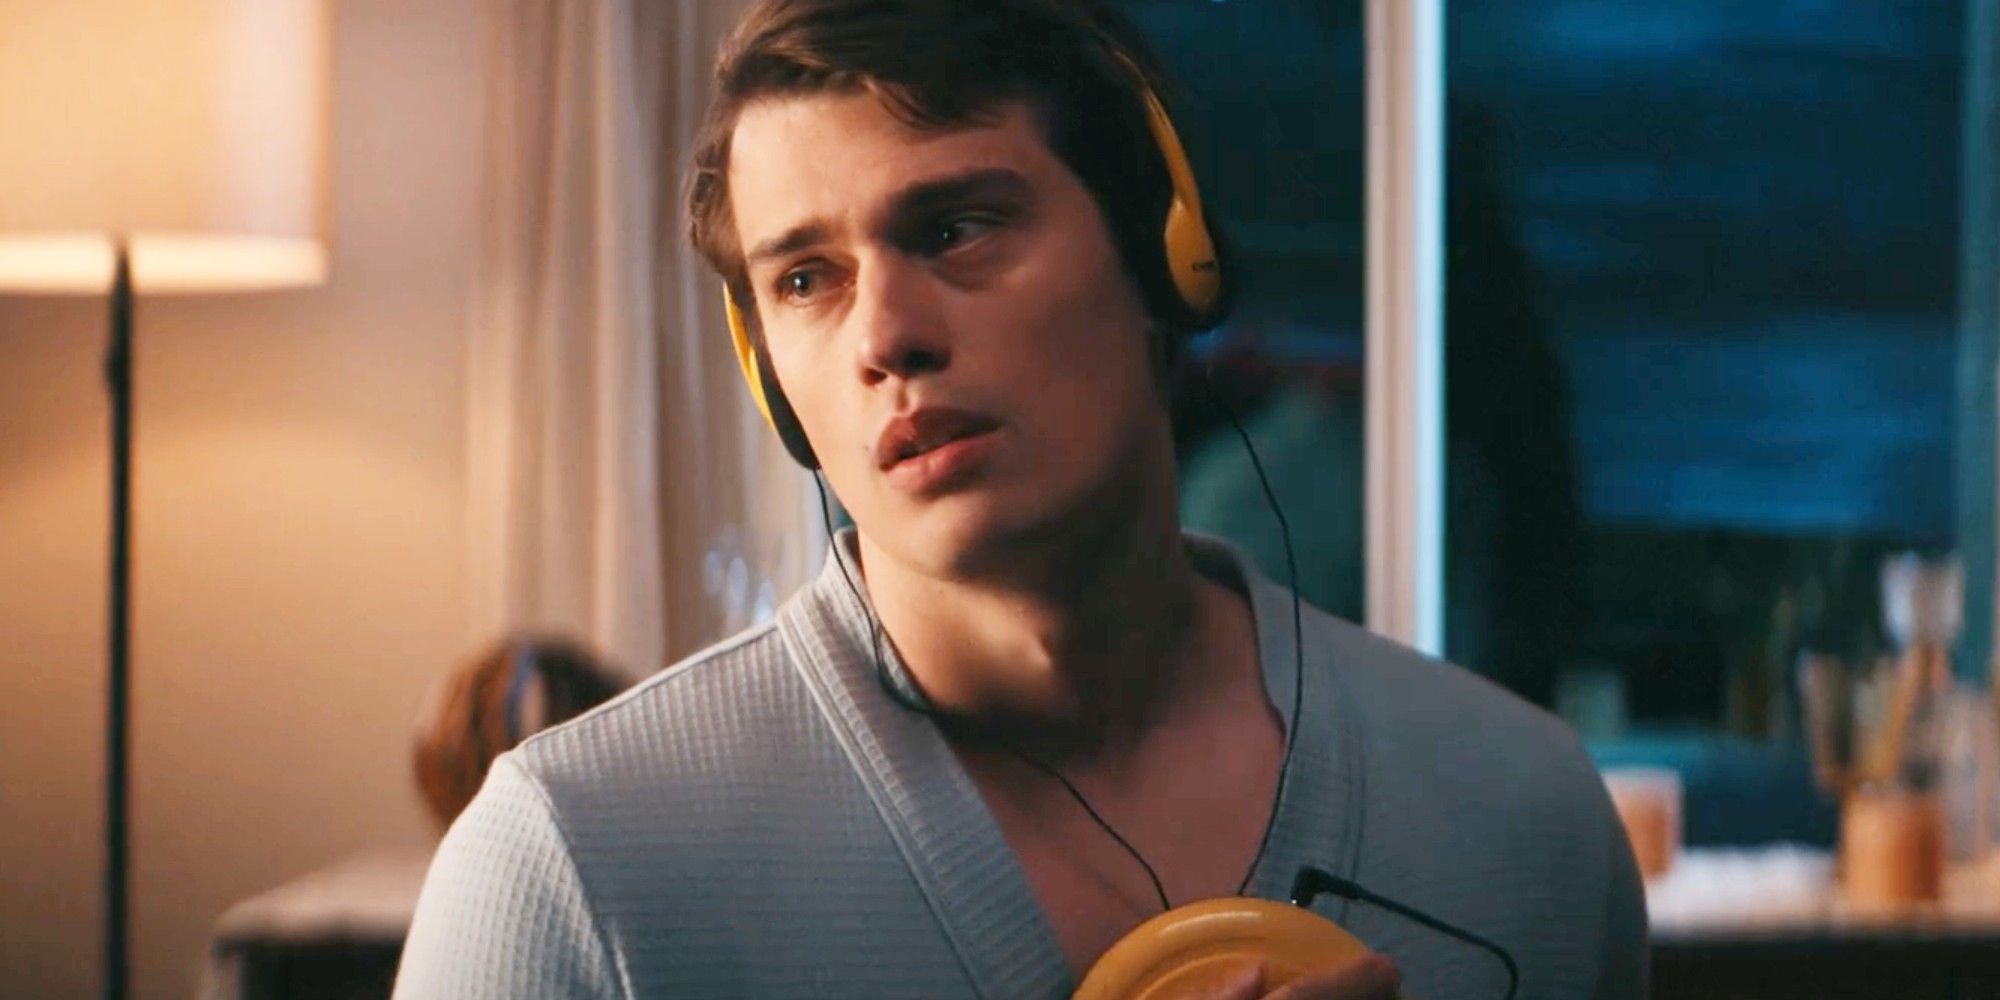 Jeff (Nicholas Galitzine) listens to a song on his Walkman with his wire headphones in Bottoms.